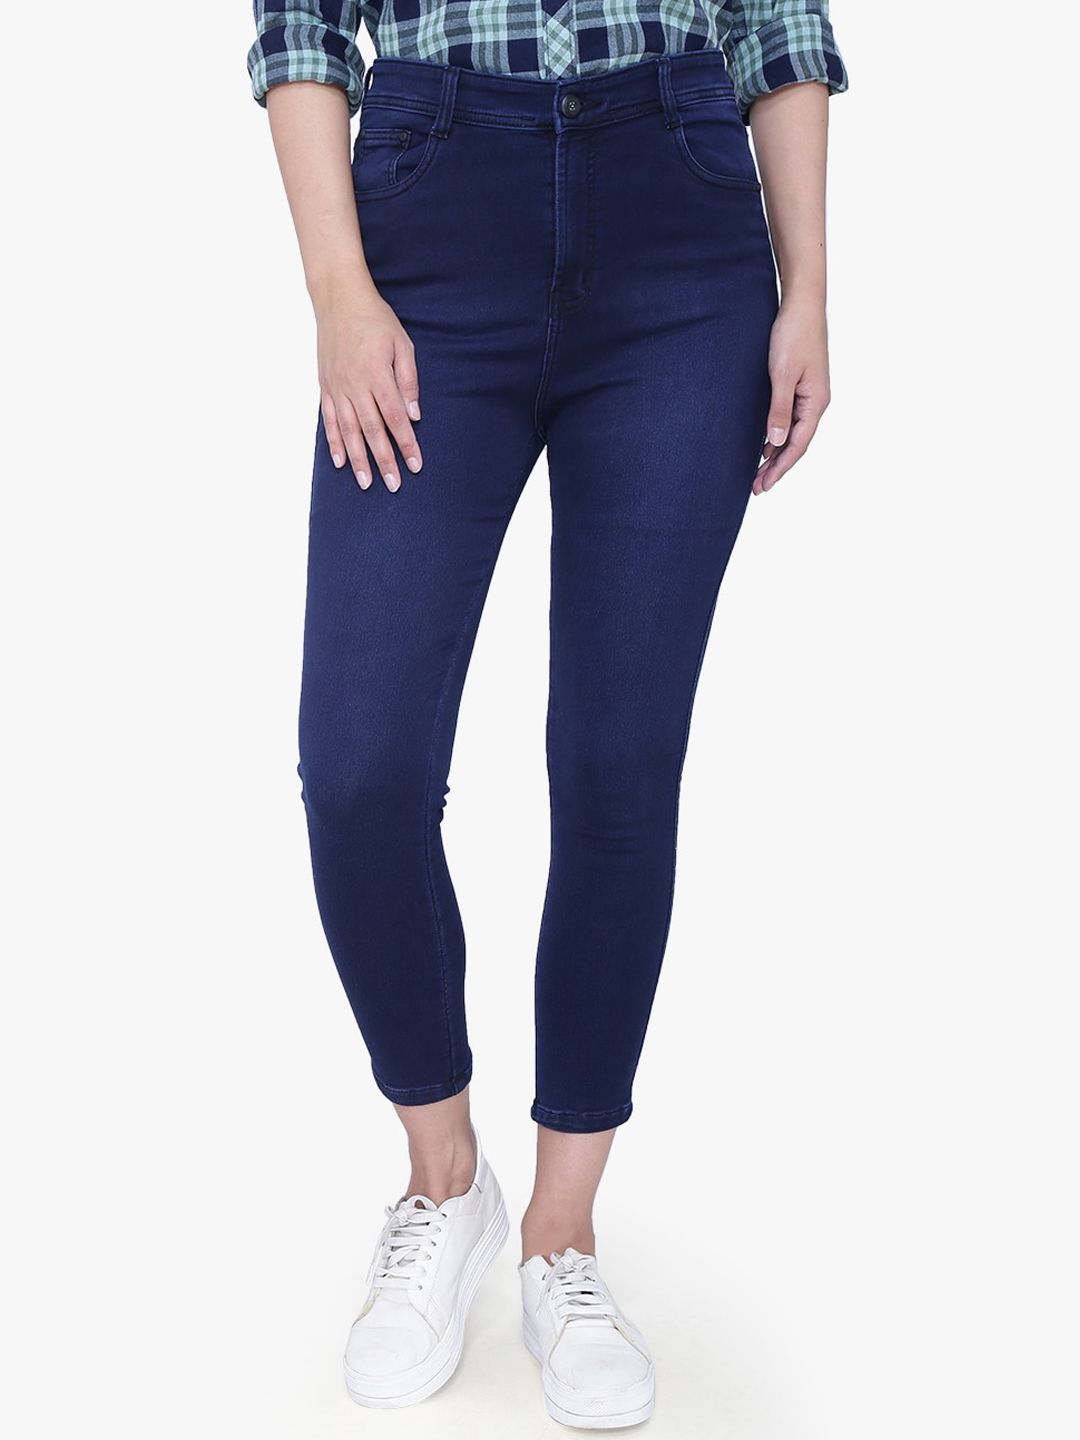 FCK-3 Women Navy Blue Jean High-Rise Stretchable Jeans Price in India